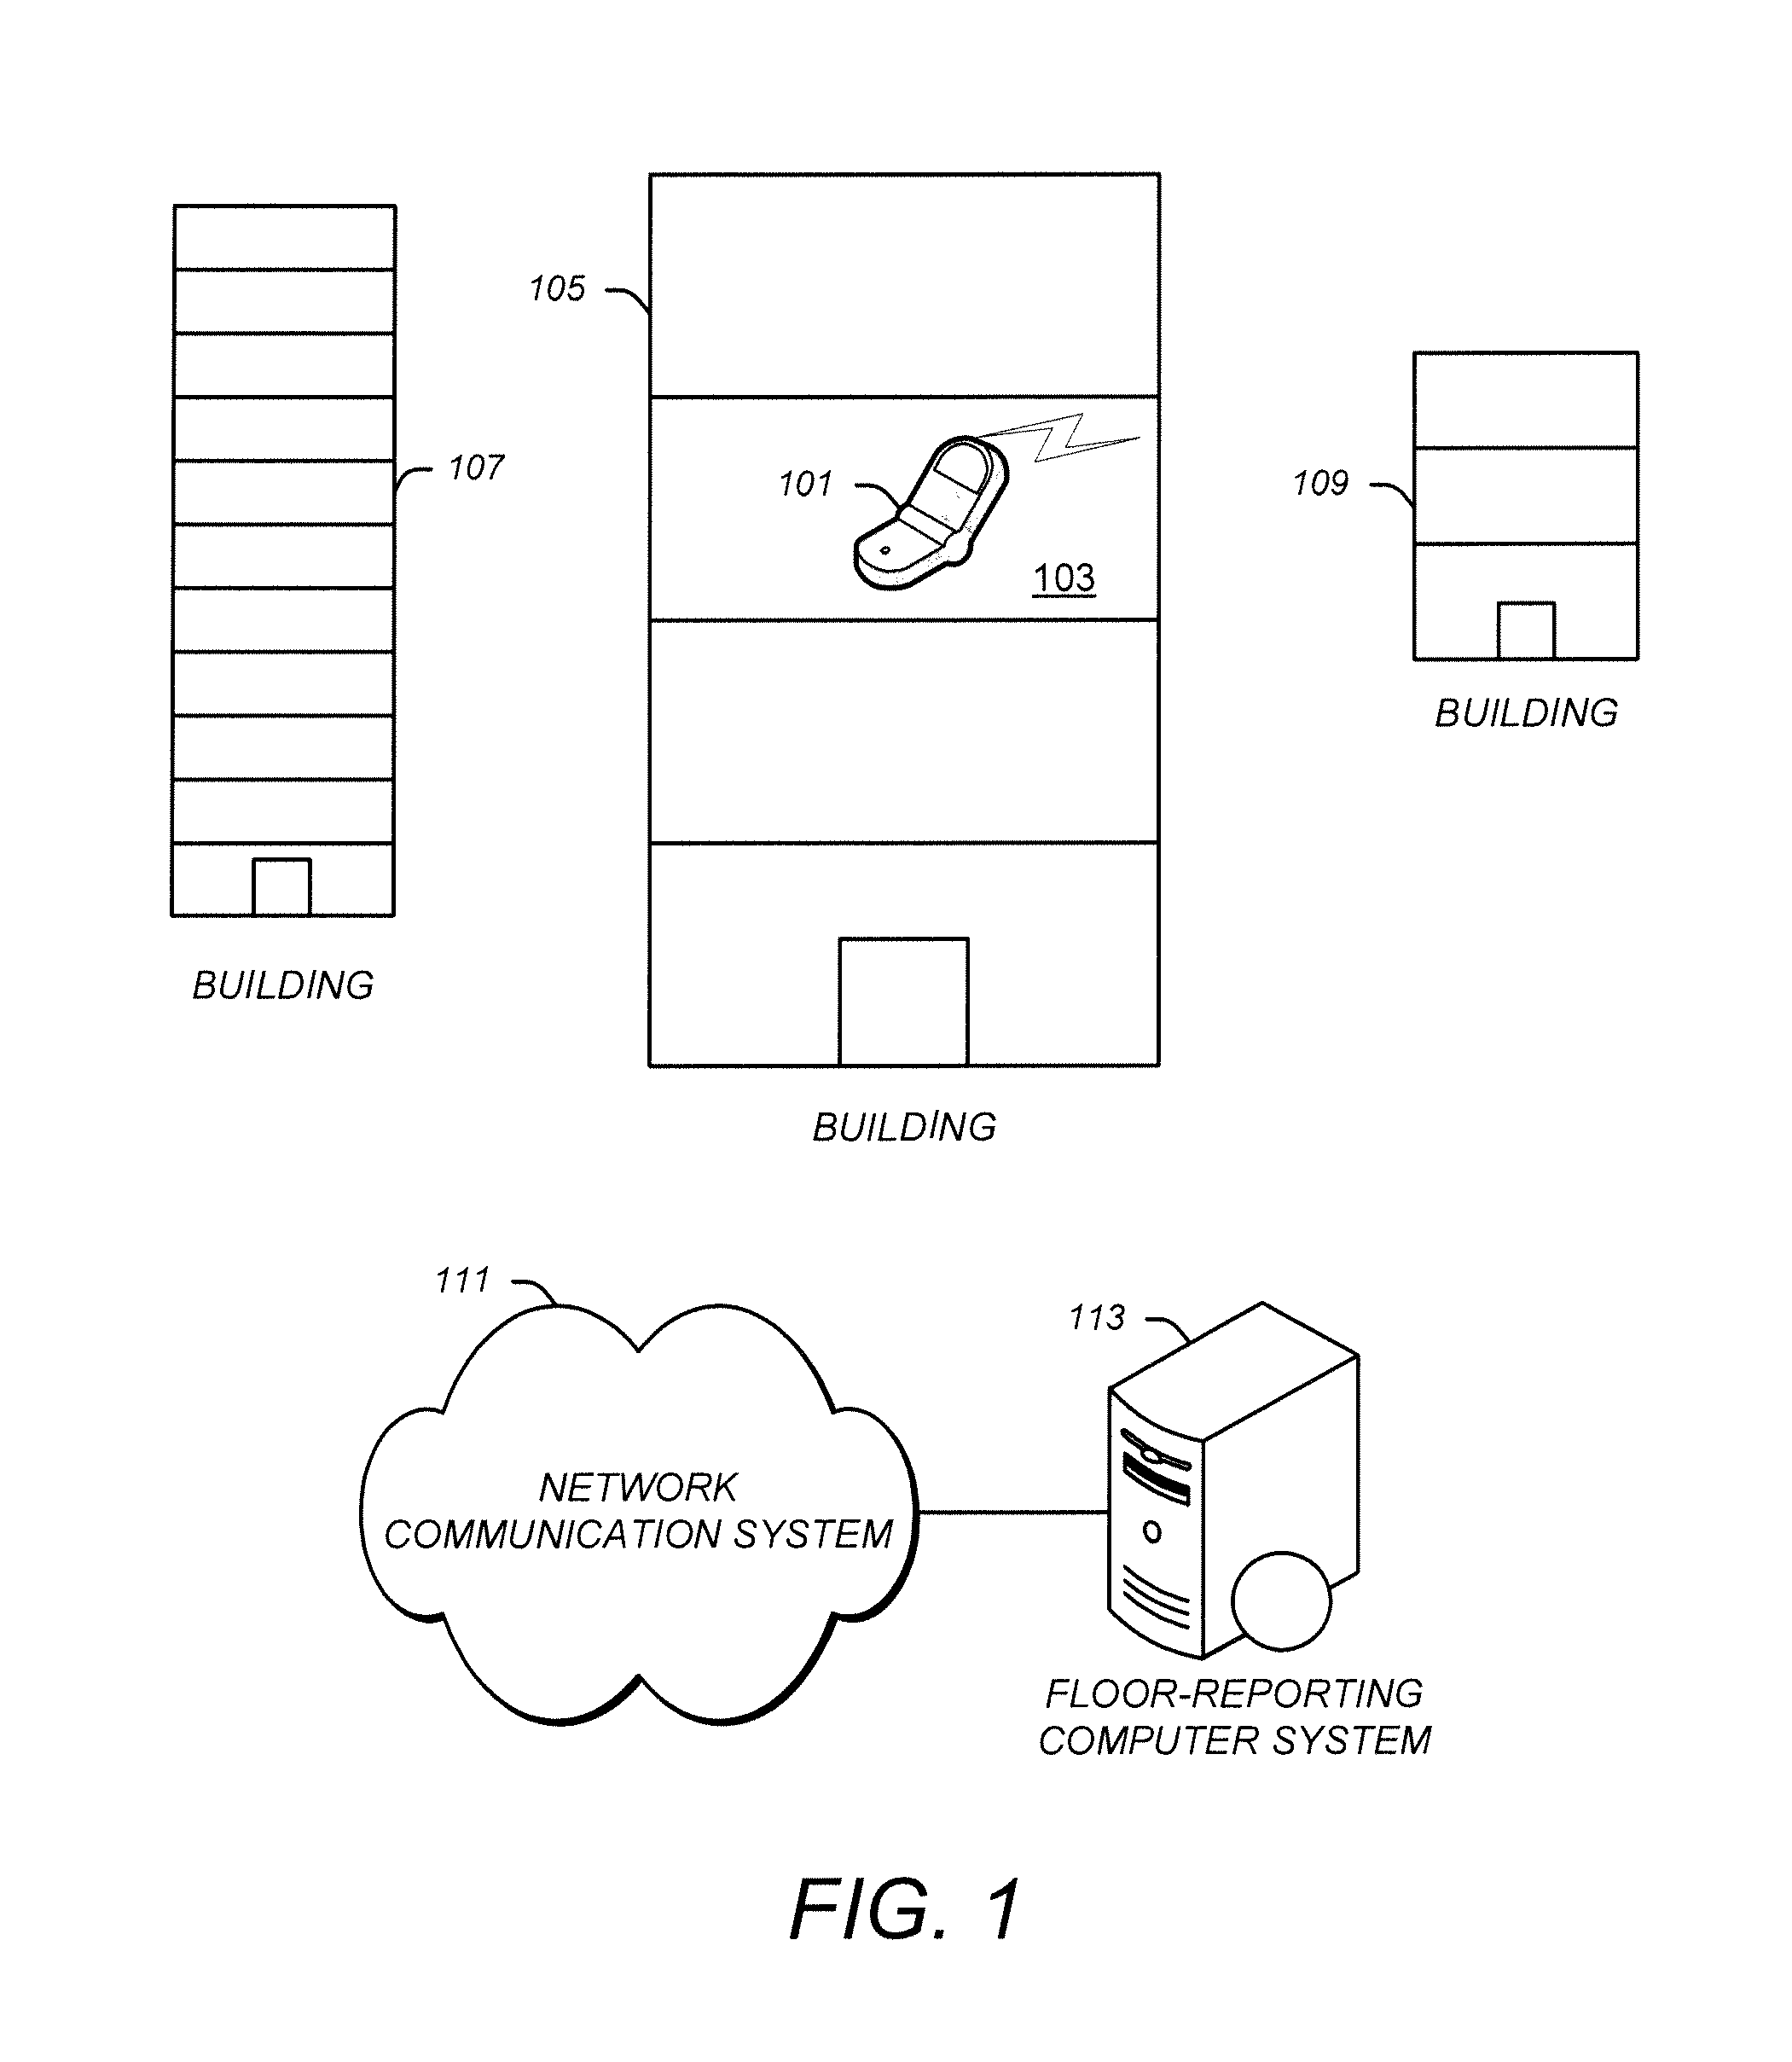 Determining building floor level of wireless mobile communication device